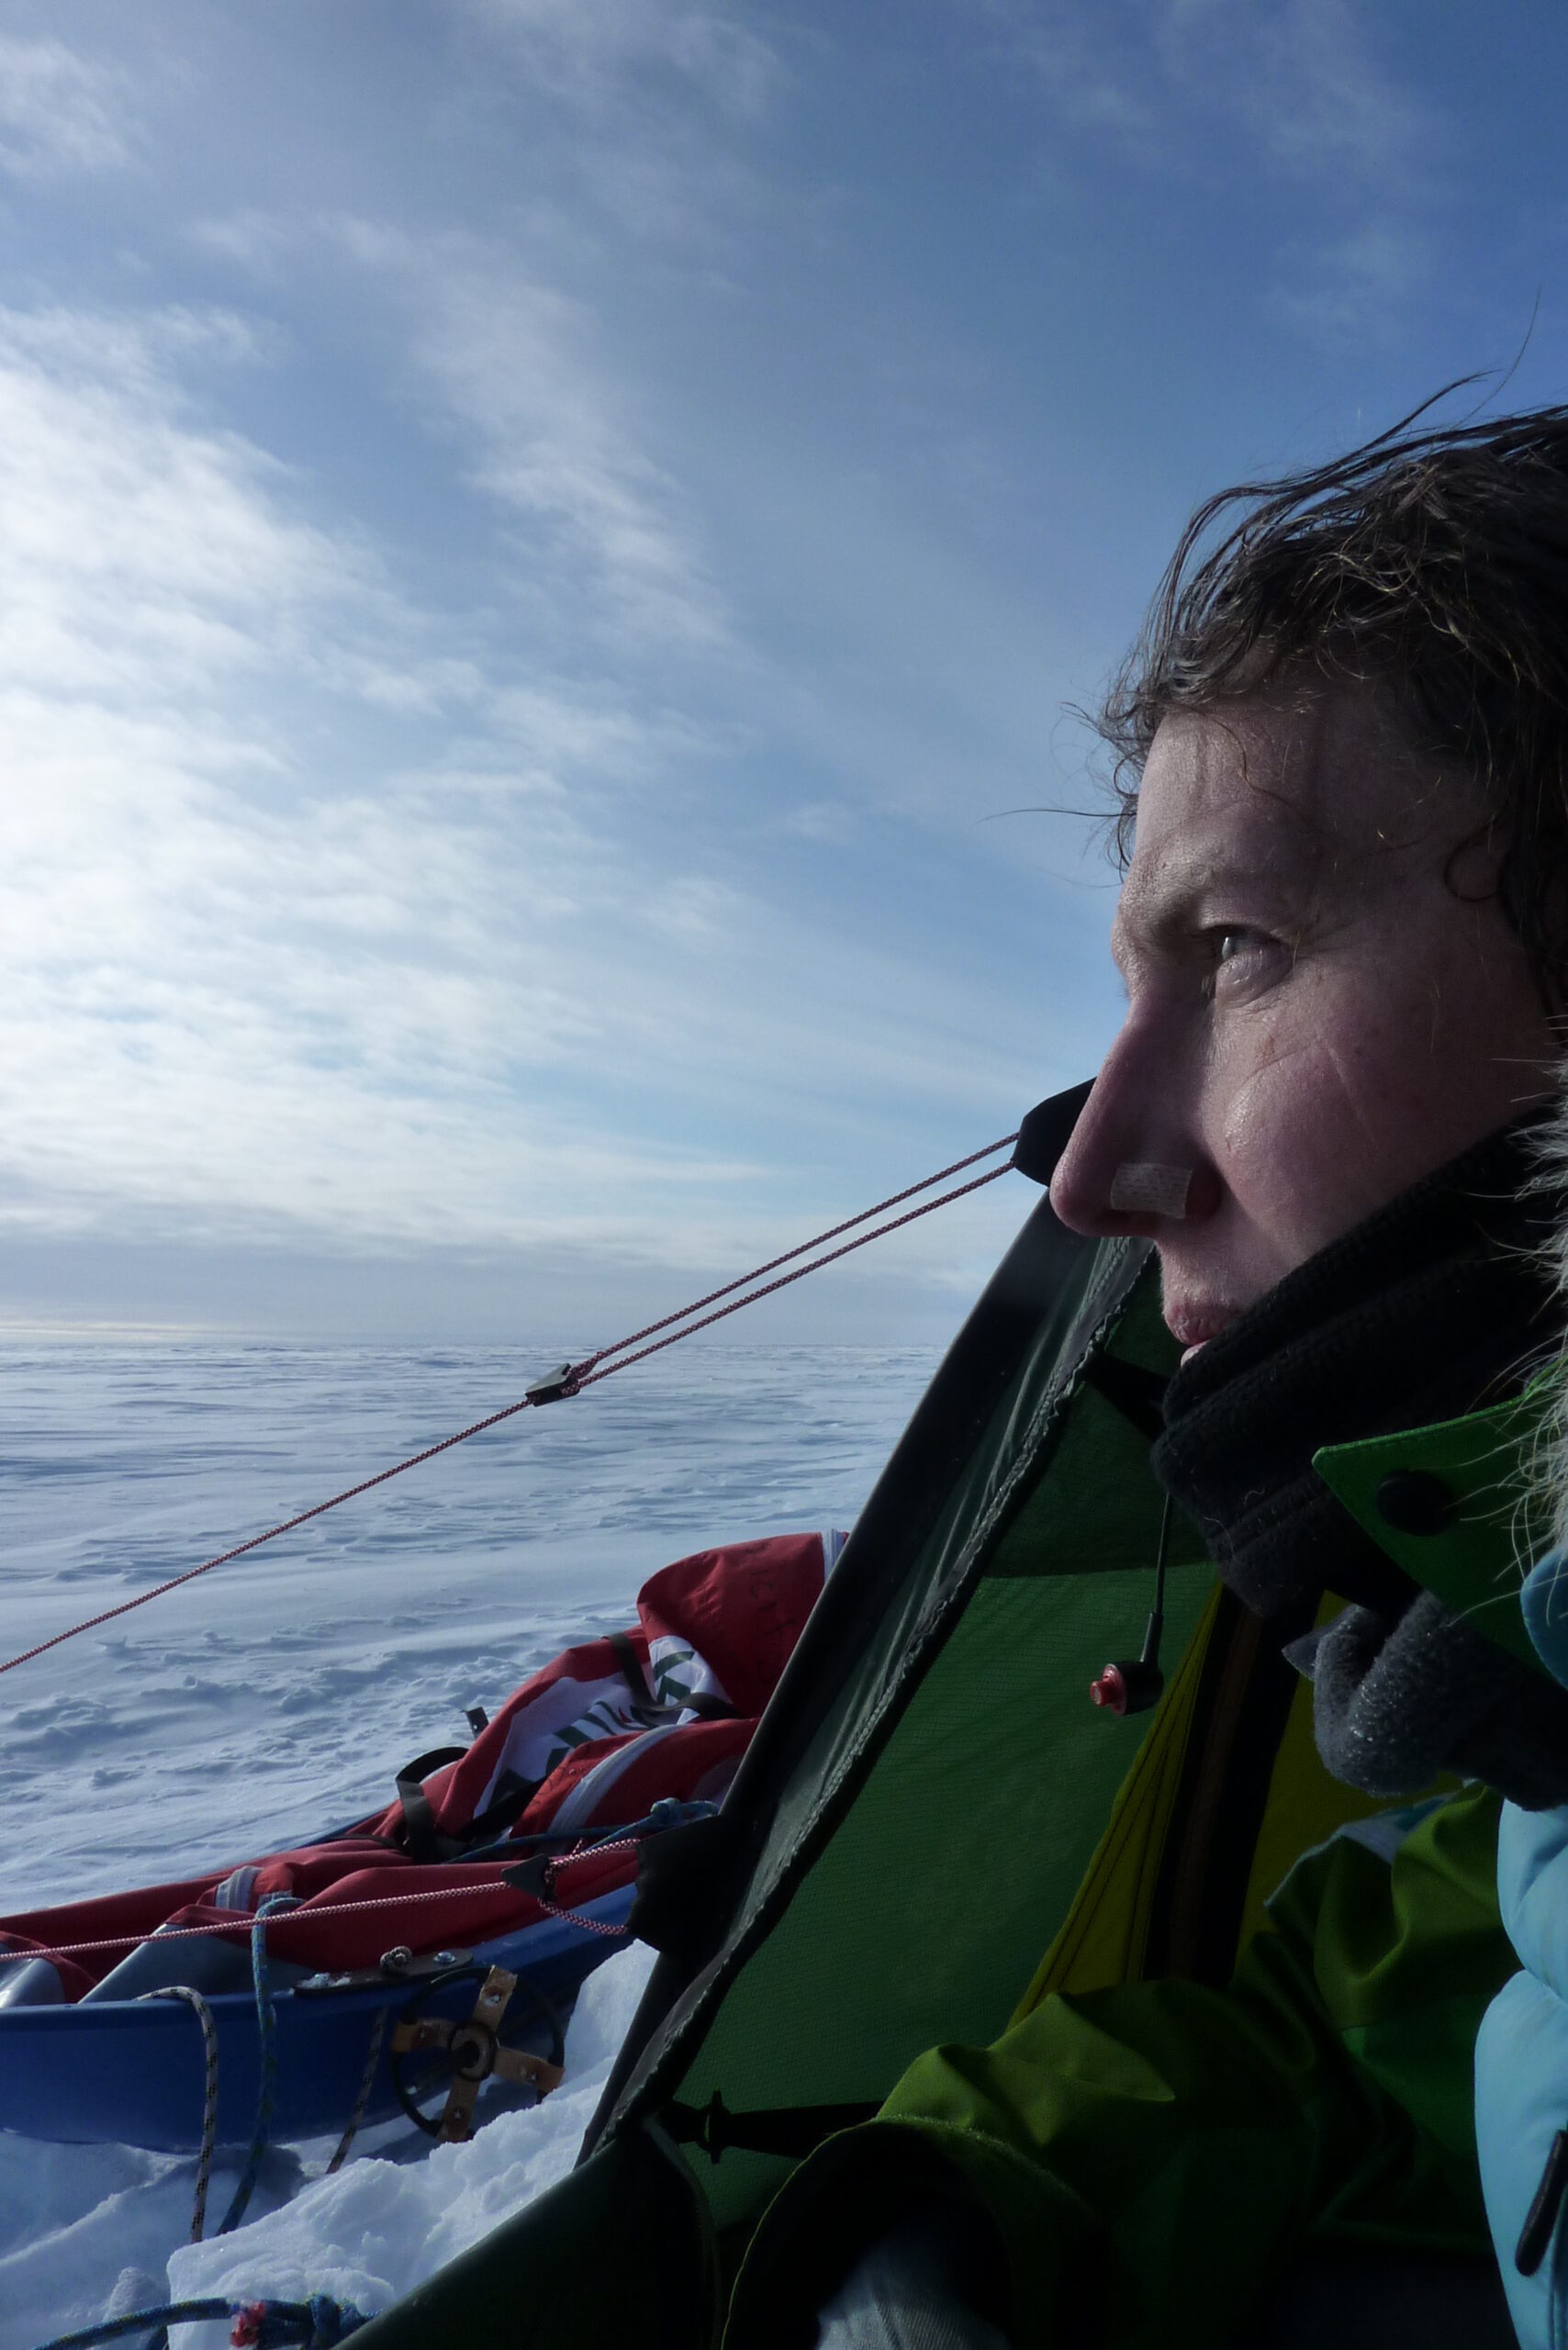 Felicity Aston, the first woman to ski across Antarctica solo, looking at the view from her tent. (Photo: Courtesy of Felicity Aston)